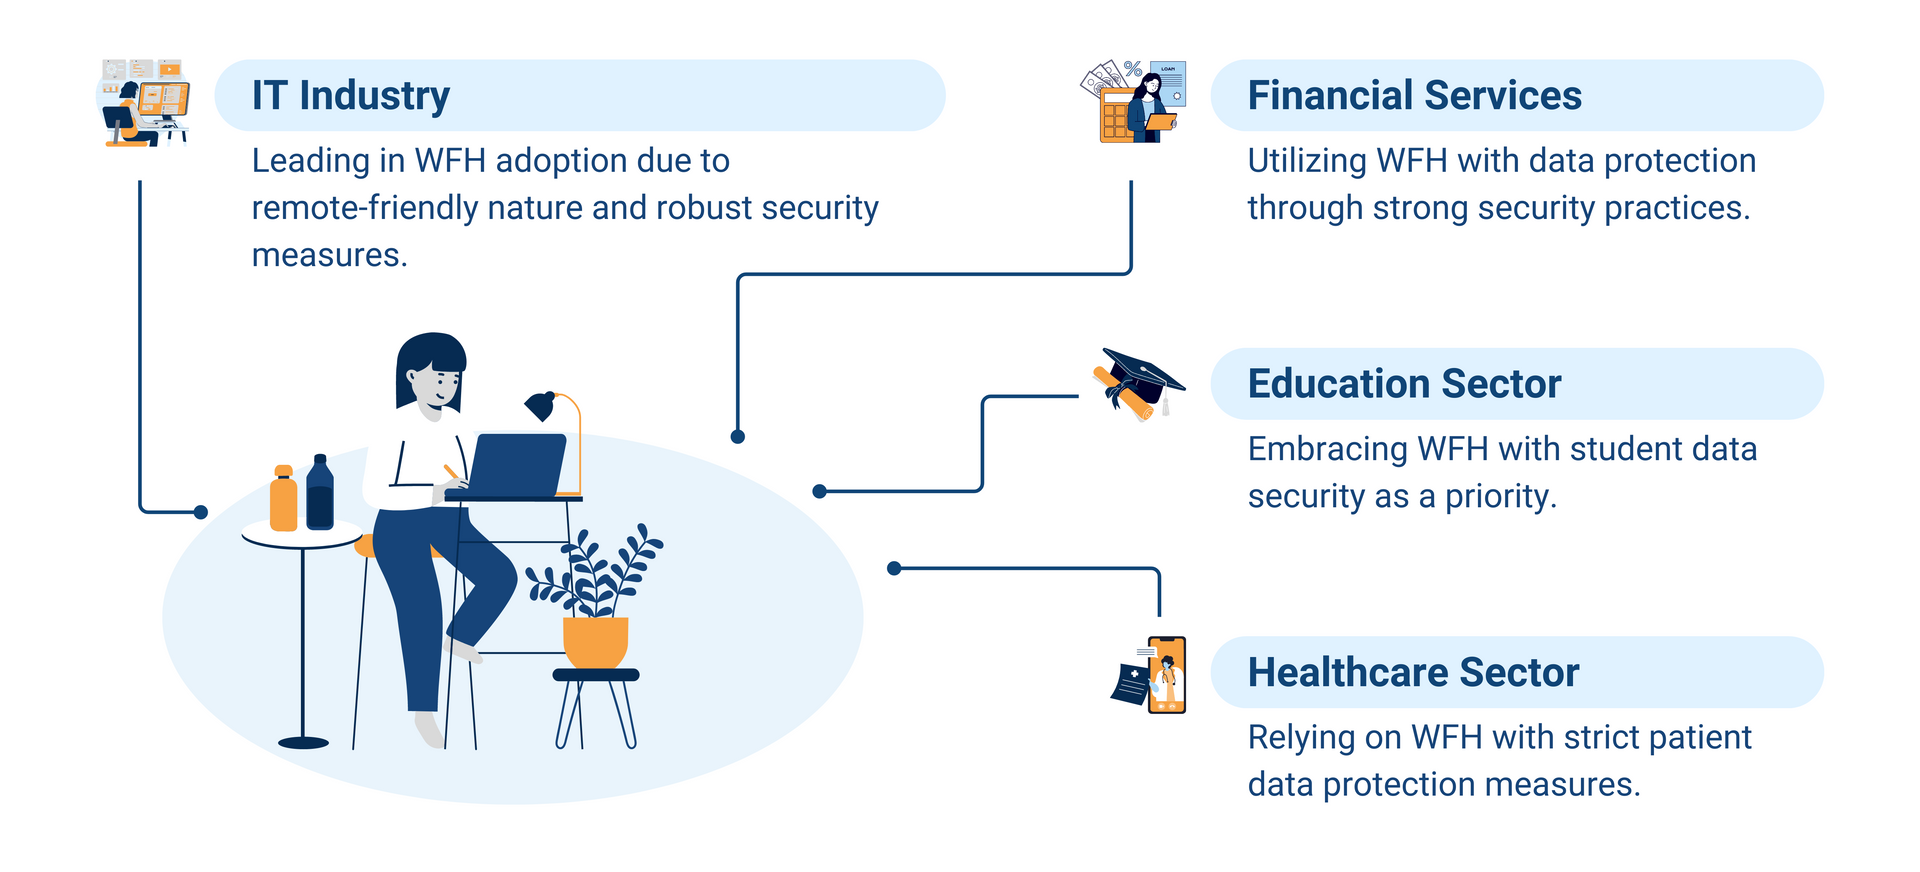 An infographic presenting the key industries of IT, Financial Services, Education, and Healthcare in which WFH is leading and the security measures imposed.